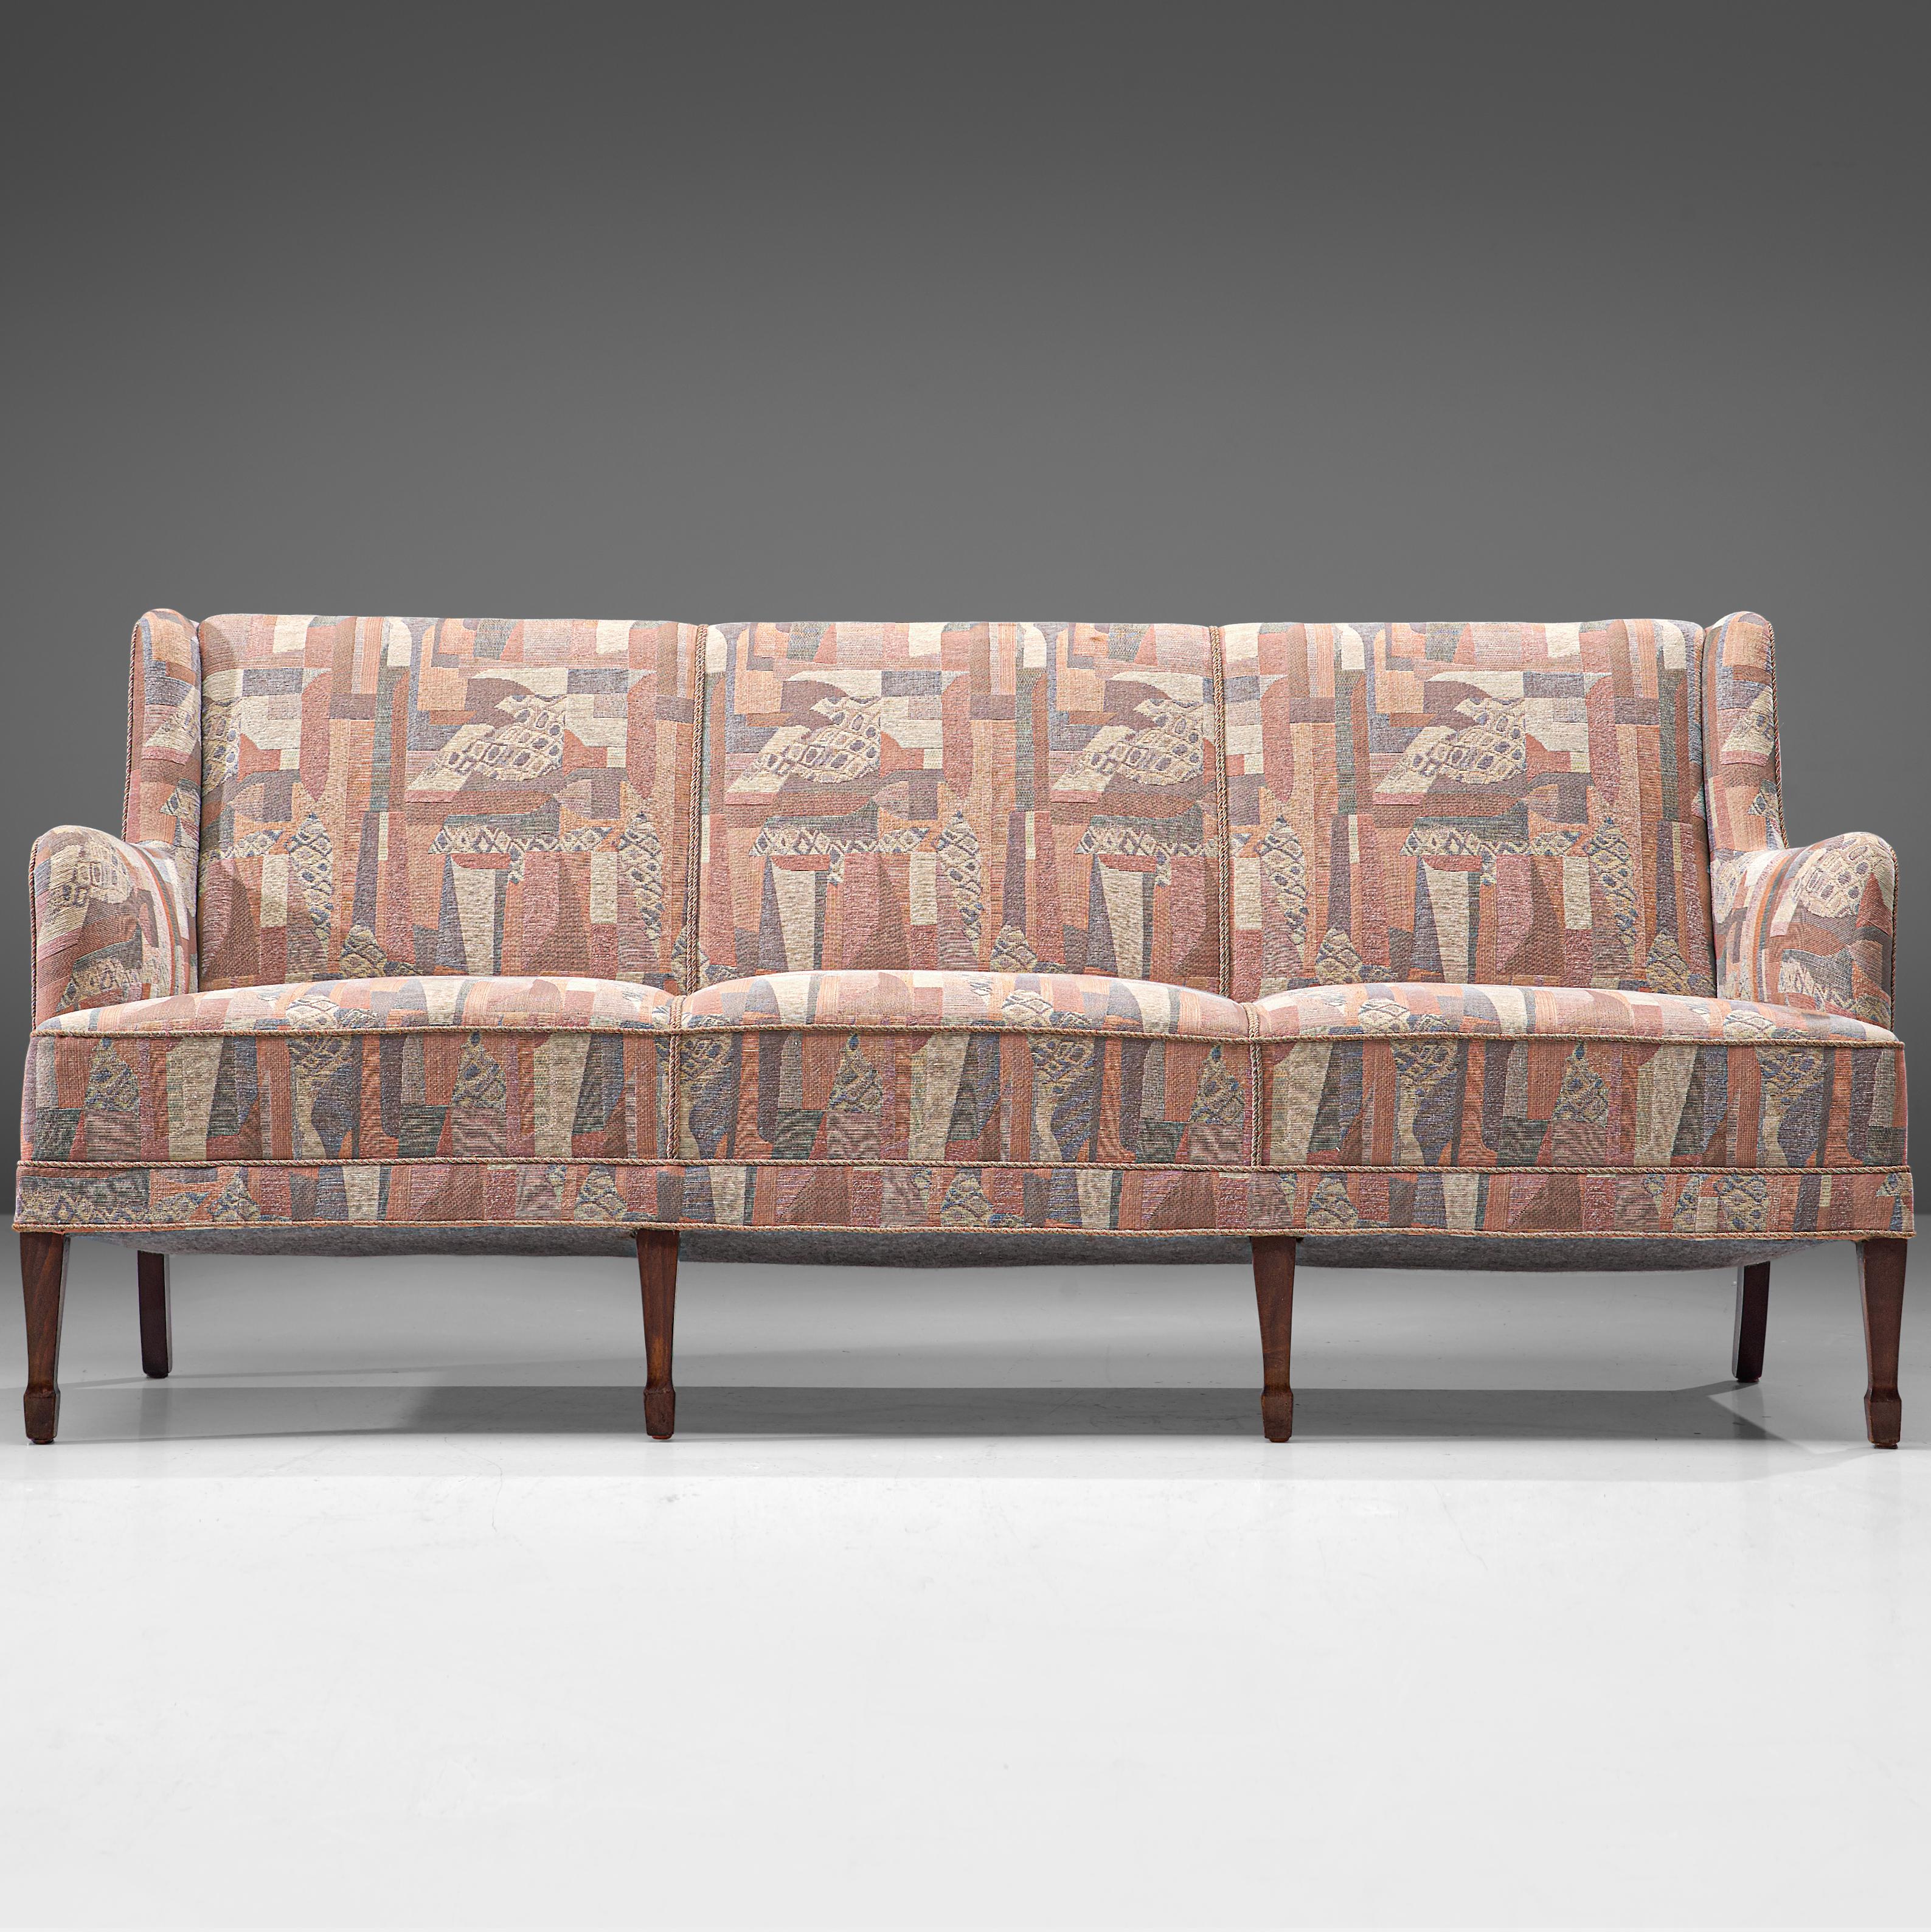 Frits Henningsen, three-seat sofa, fabric and oak, Denmark, 1940s. 

This elegant three-seat sofa is made by master cabinetmaker Frits Henningsen. This refined sofa is a classic piece. The backrest holds small wings, which runs over into the